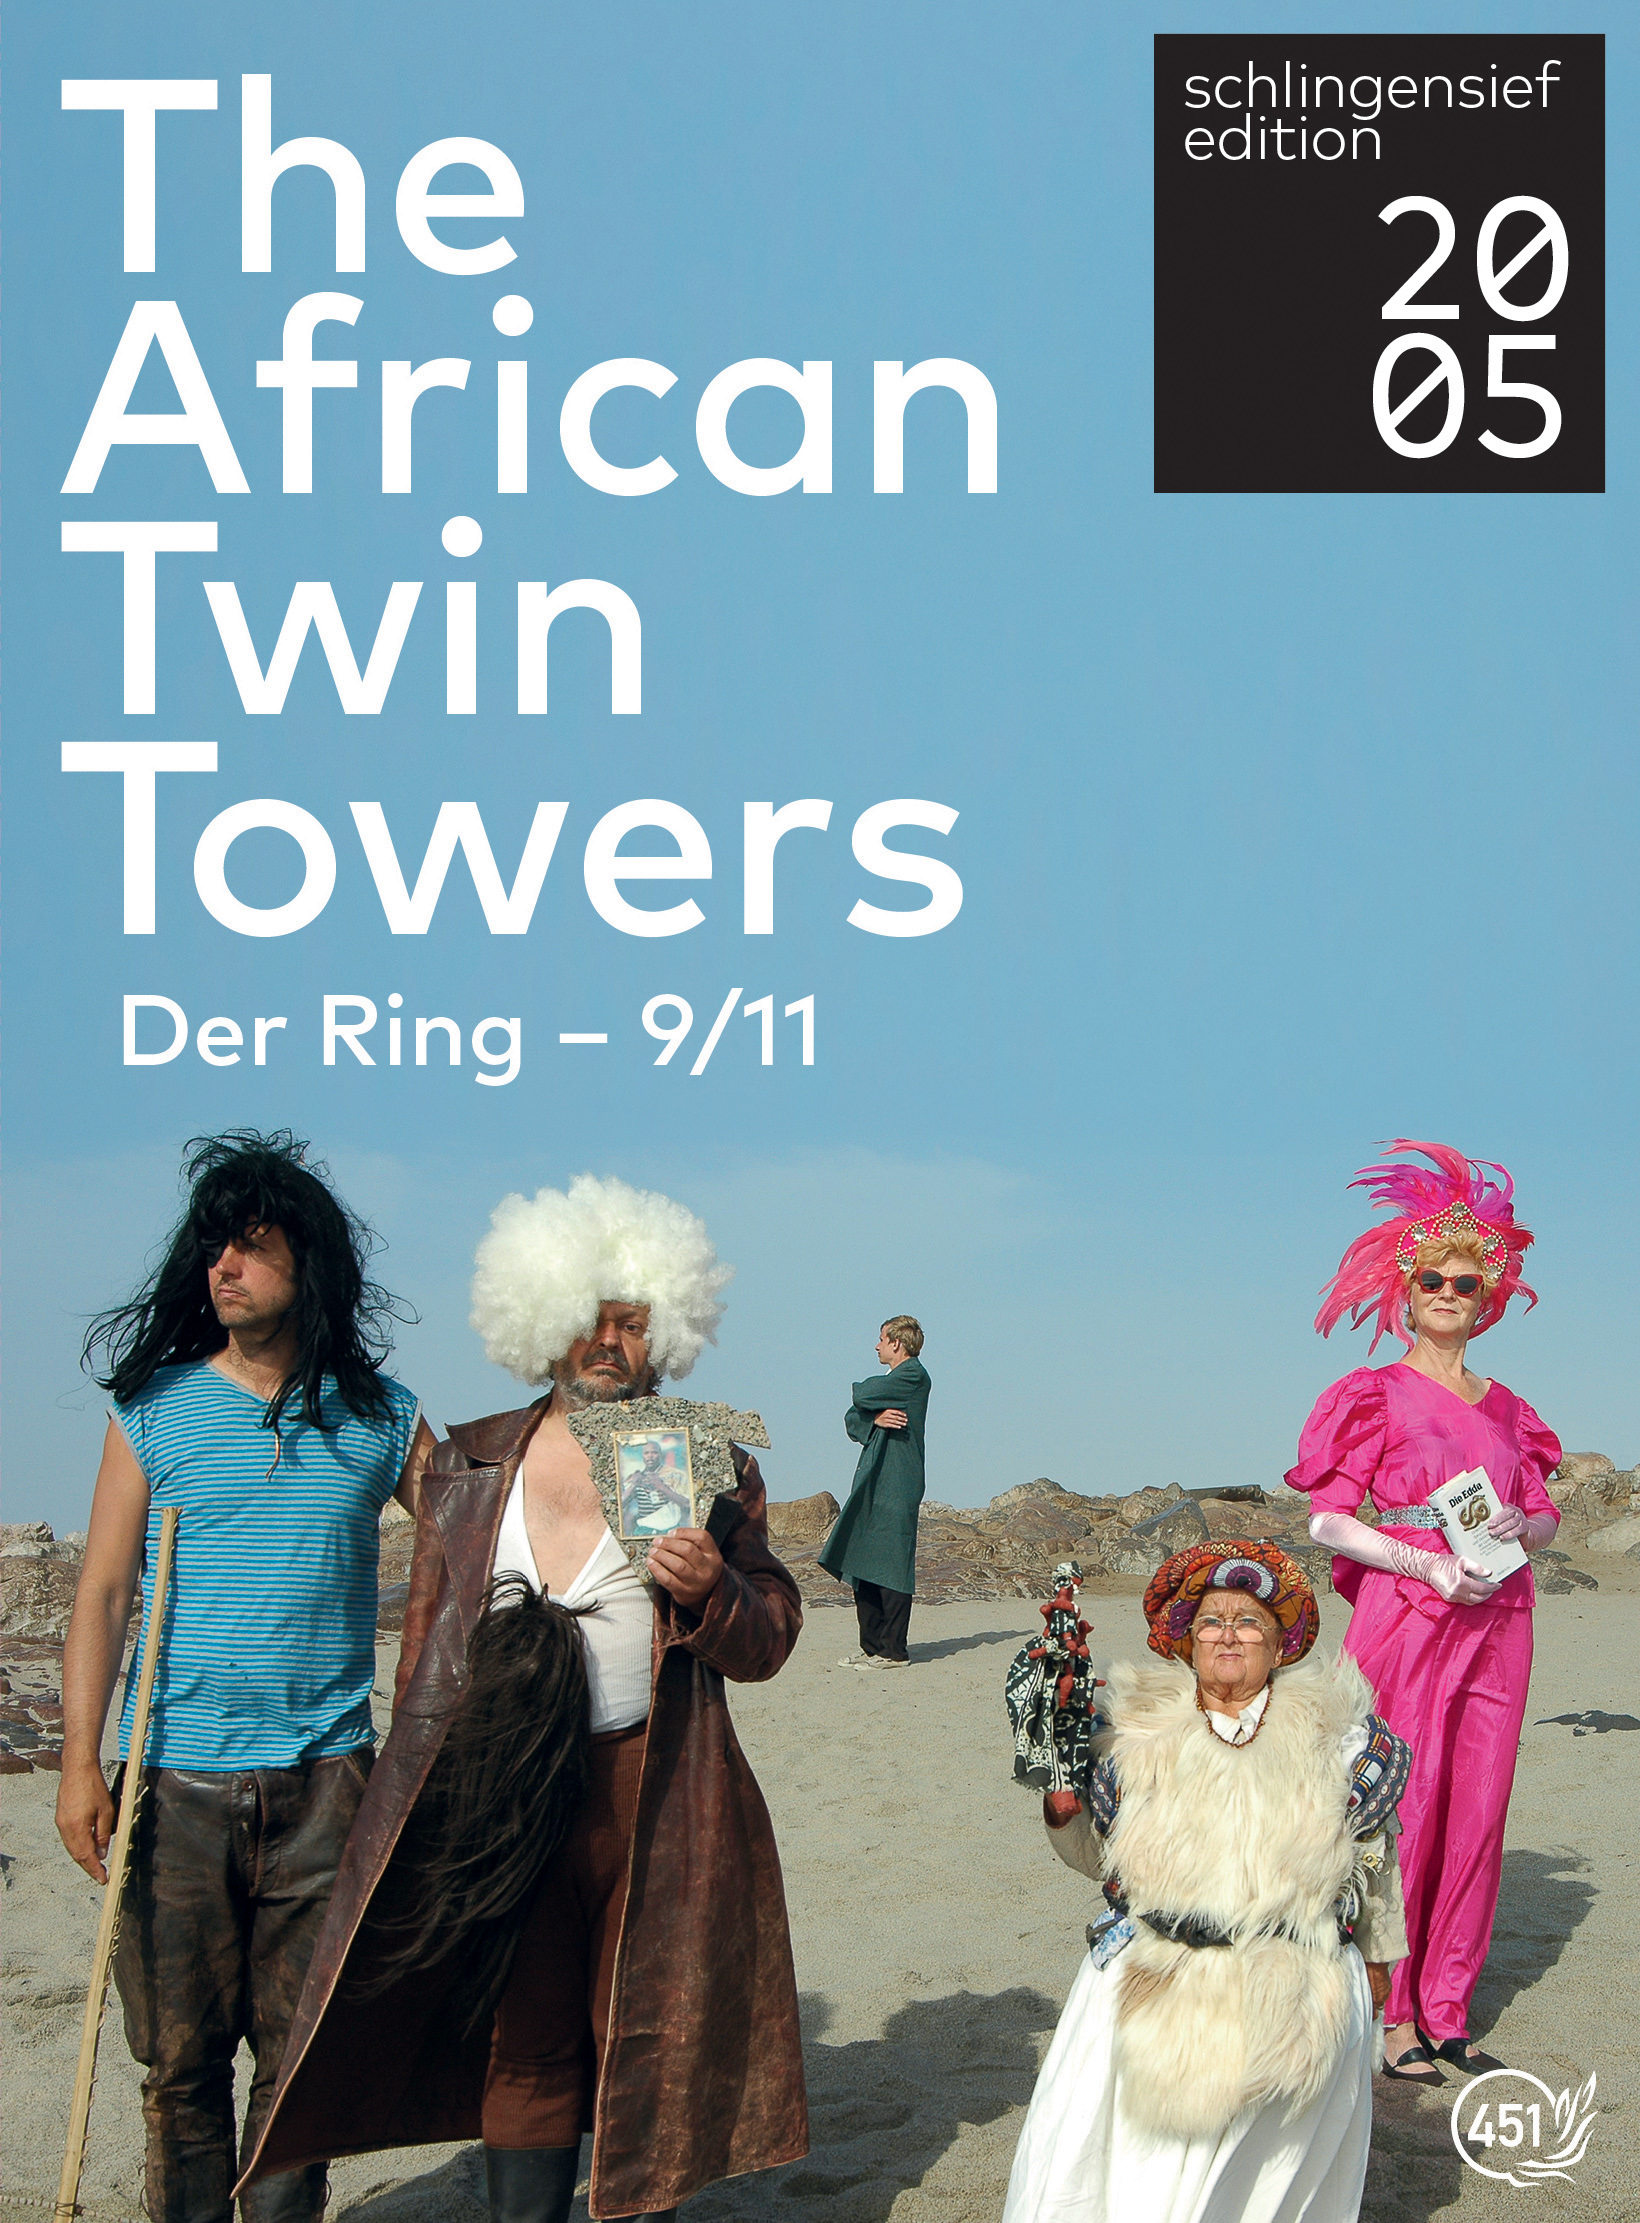 The African Twintowers (2008) Screenshot 1